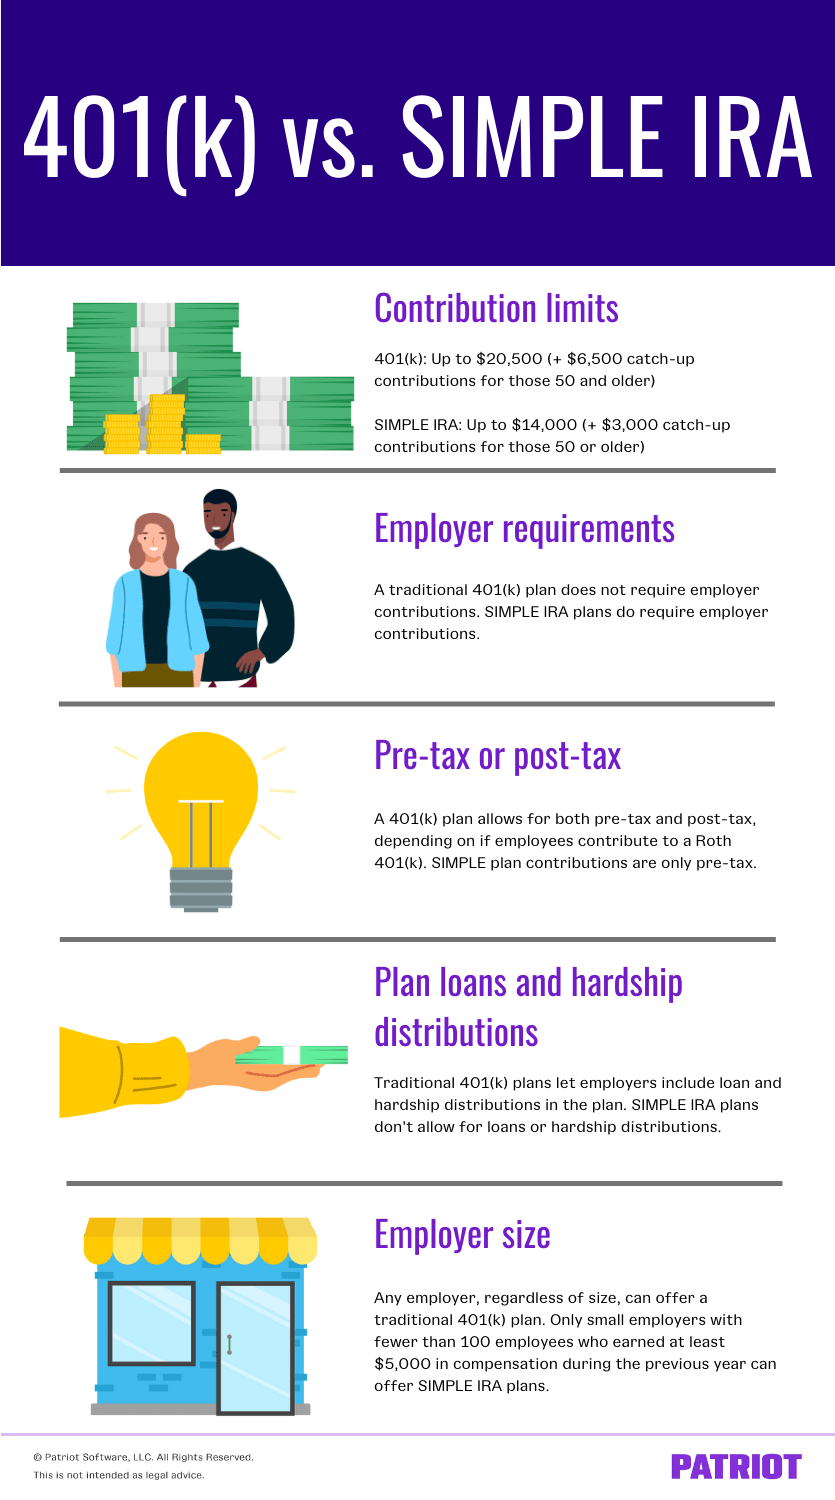 differences between 401(k) vs. SIMPLE IRA 